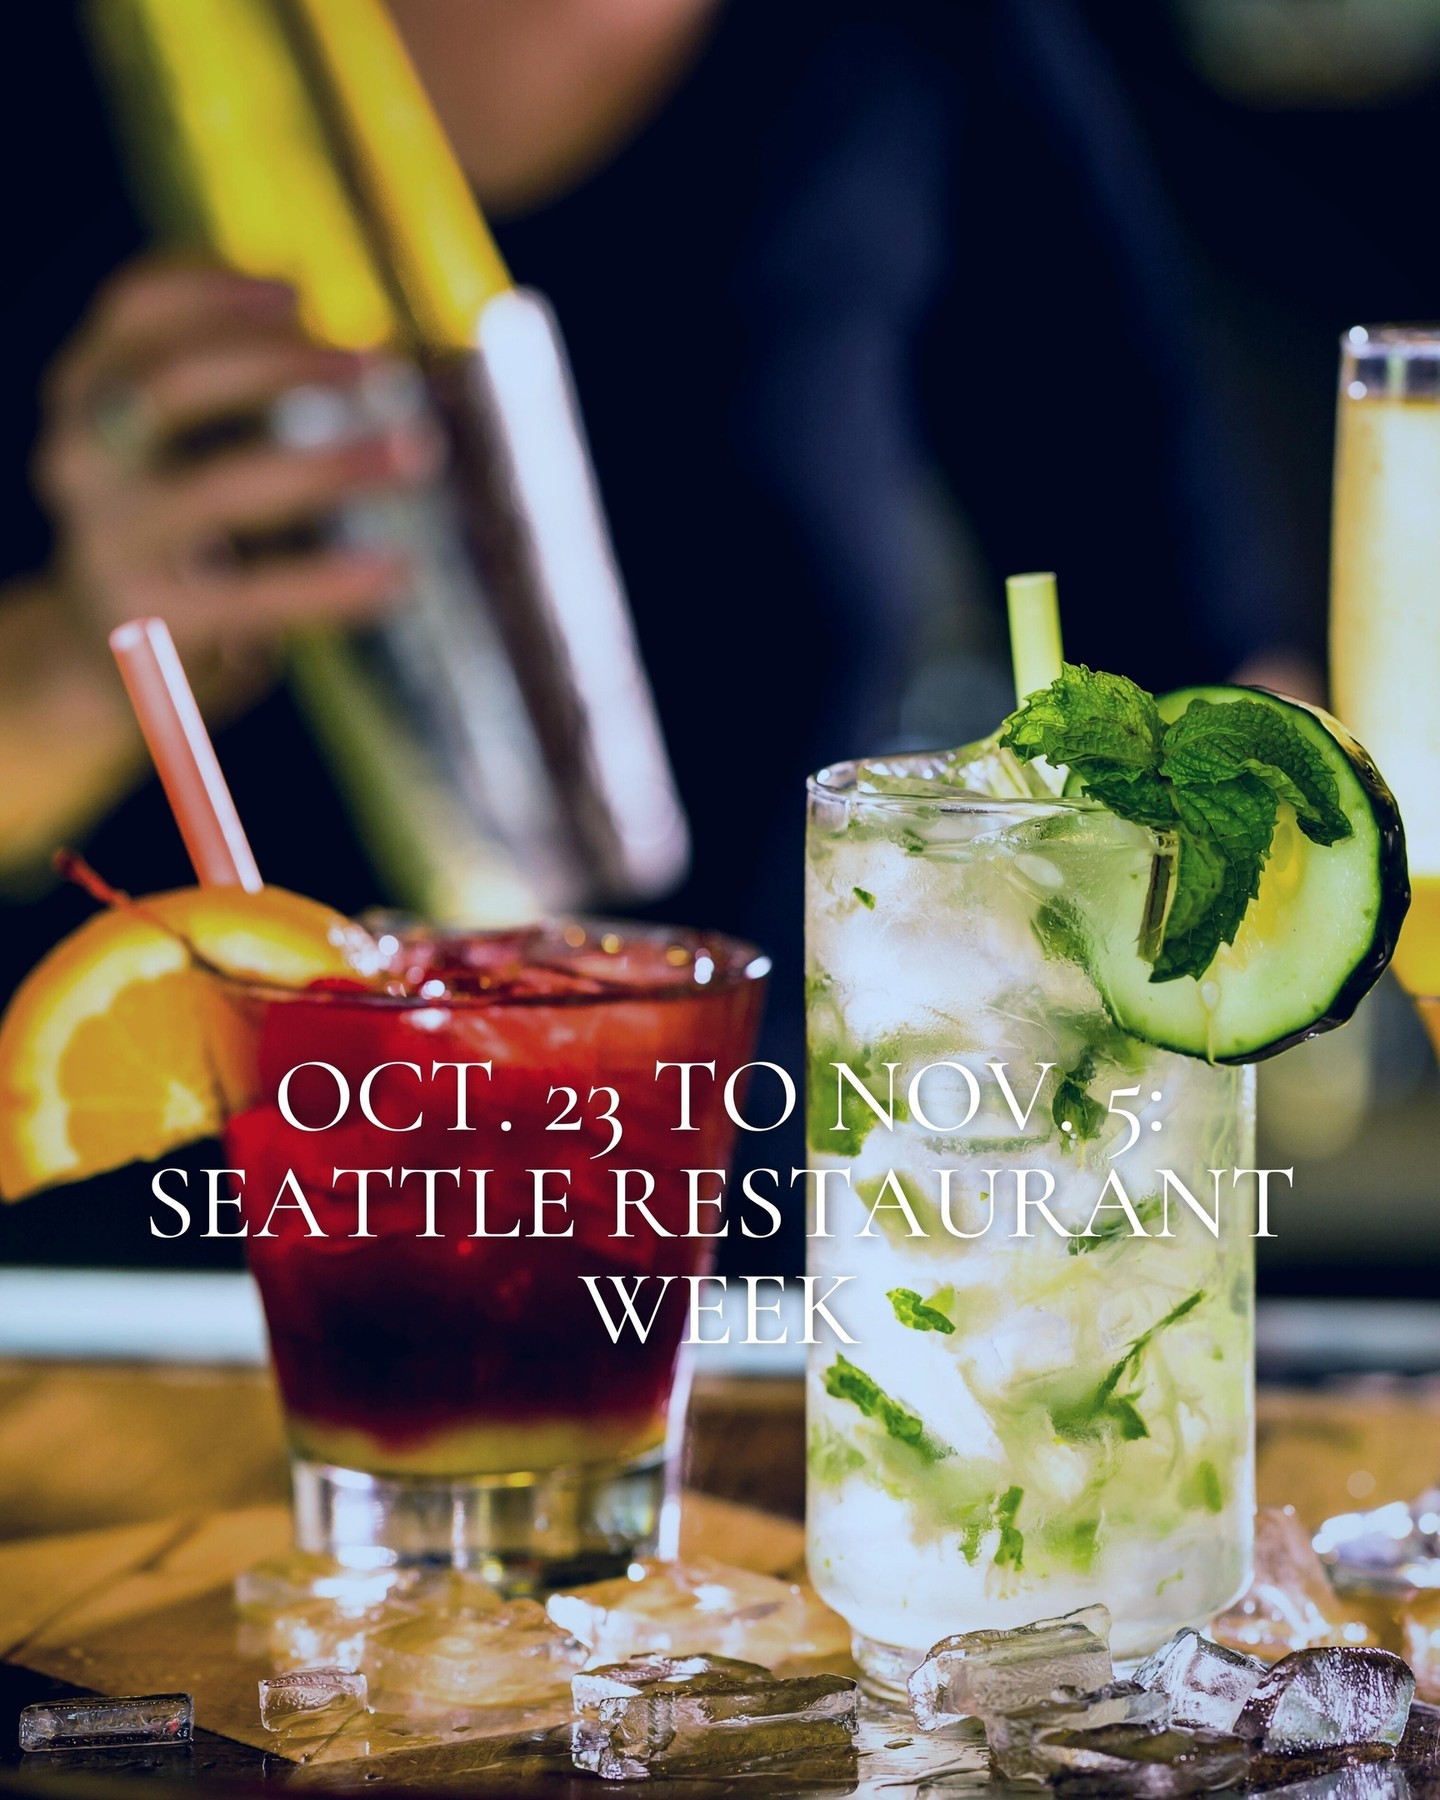 HAPPENING NOW: Seattle Restaurant Week 🥘🍹 Attention, foodies! @seattlerestaurantweek is back Oct. 23 to Nov. 5, celebrating Emerald City’s culinary community. Seattle Restaurant Week, a prix-fixe dining promotion, gives diners the chance to celebrate Seattle’s bright and brilliant culinary landscape by enjoying specially curated menus priced at $20, $35, $50 and $65 at participating restaurants. Read more about participating restaurants and other details using the link in our bio!